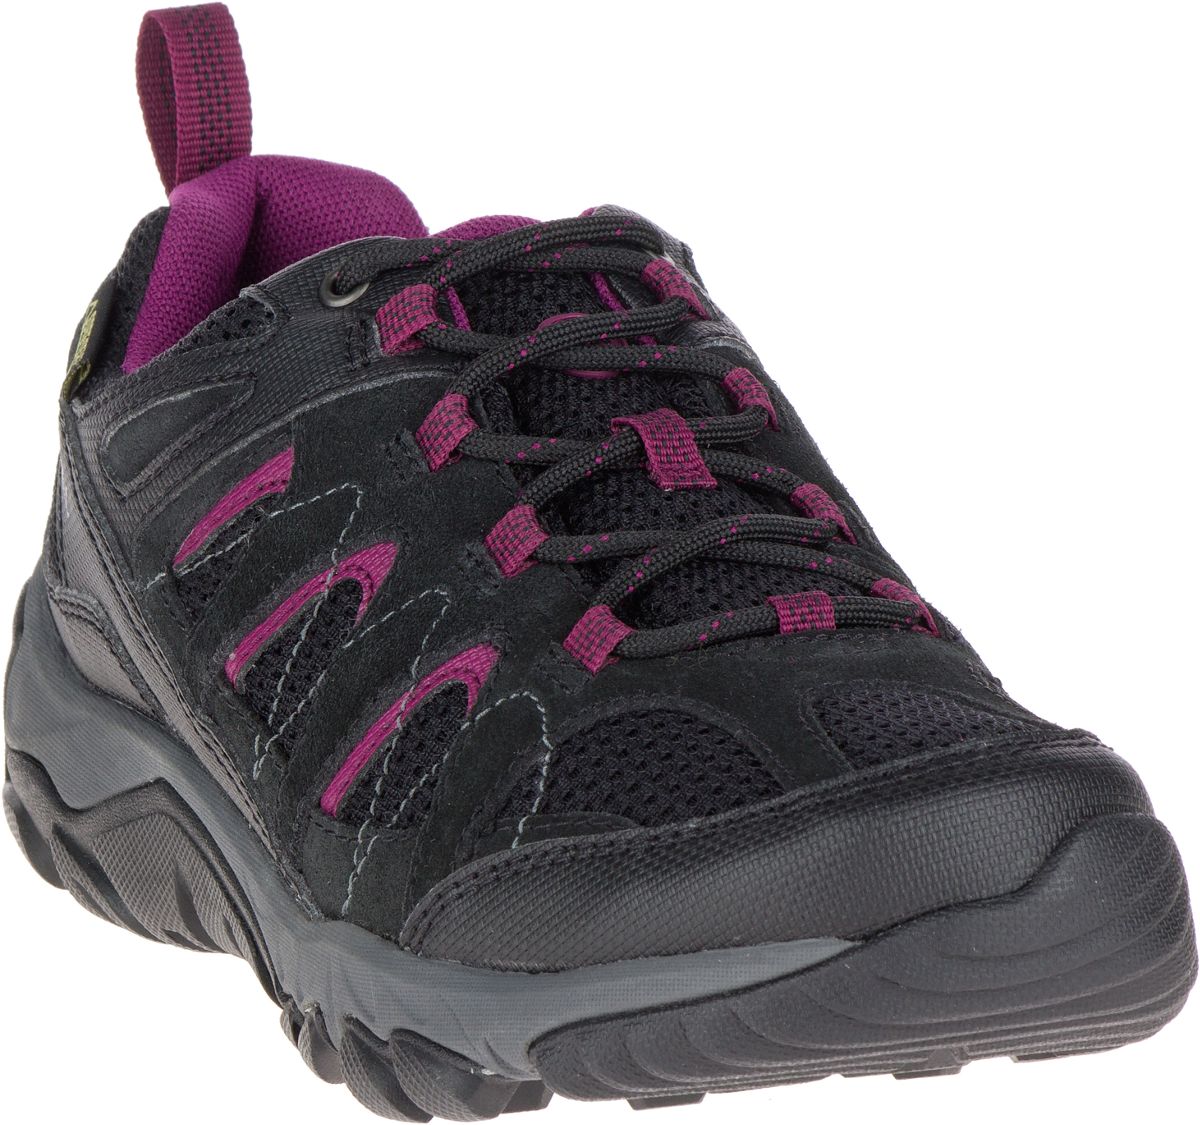 Outmost Ventilator GORE-TEX®, , dynamic 4